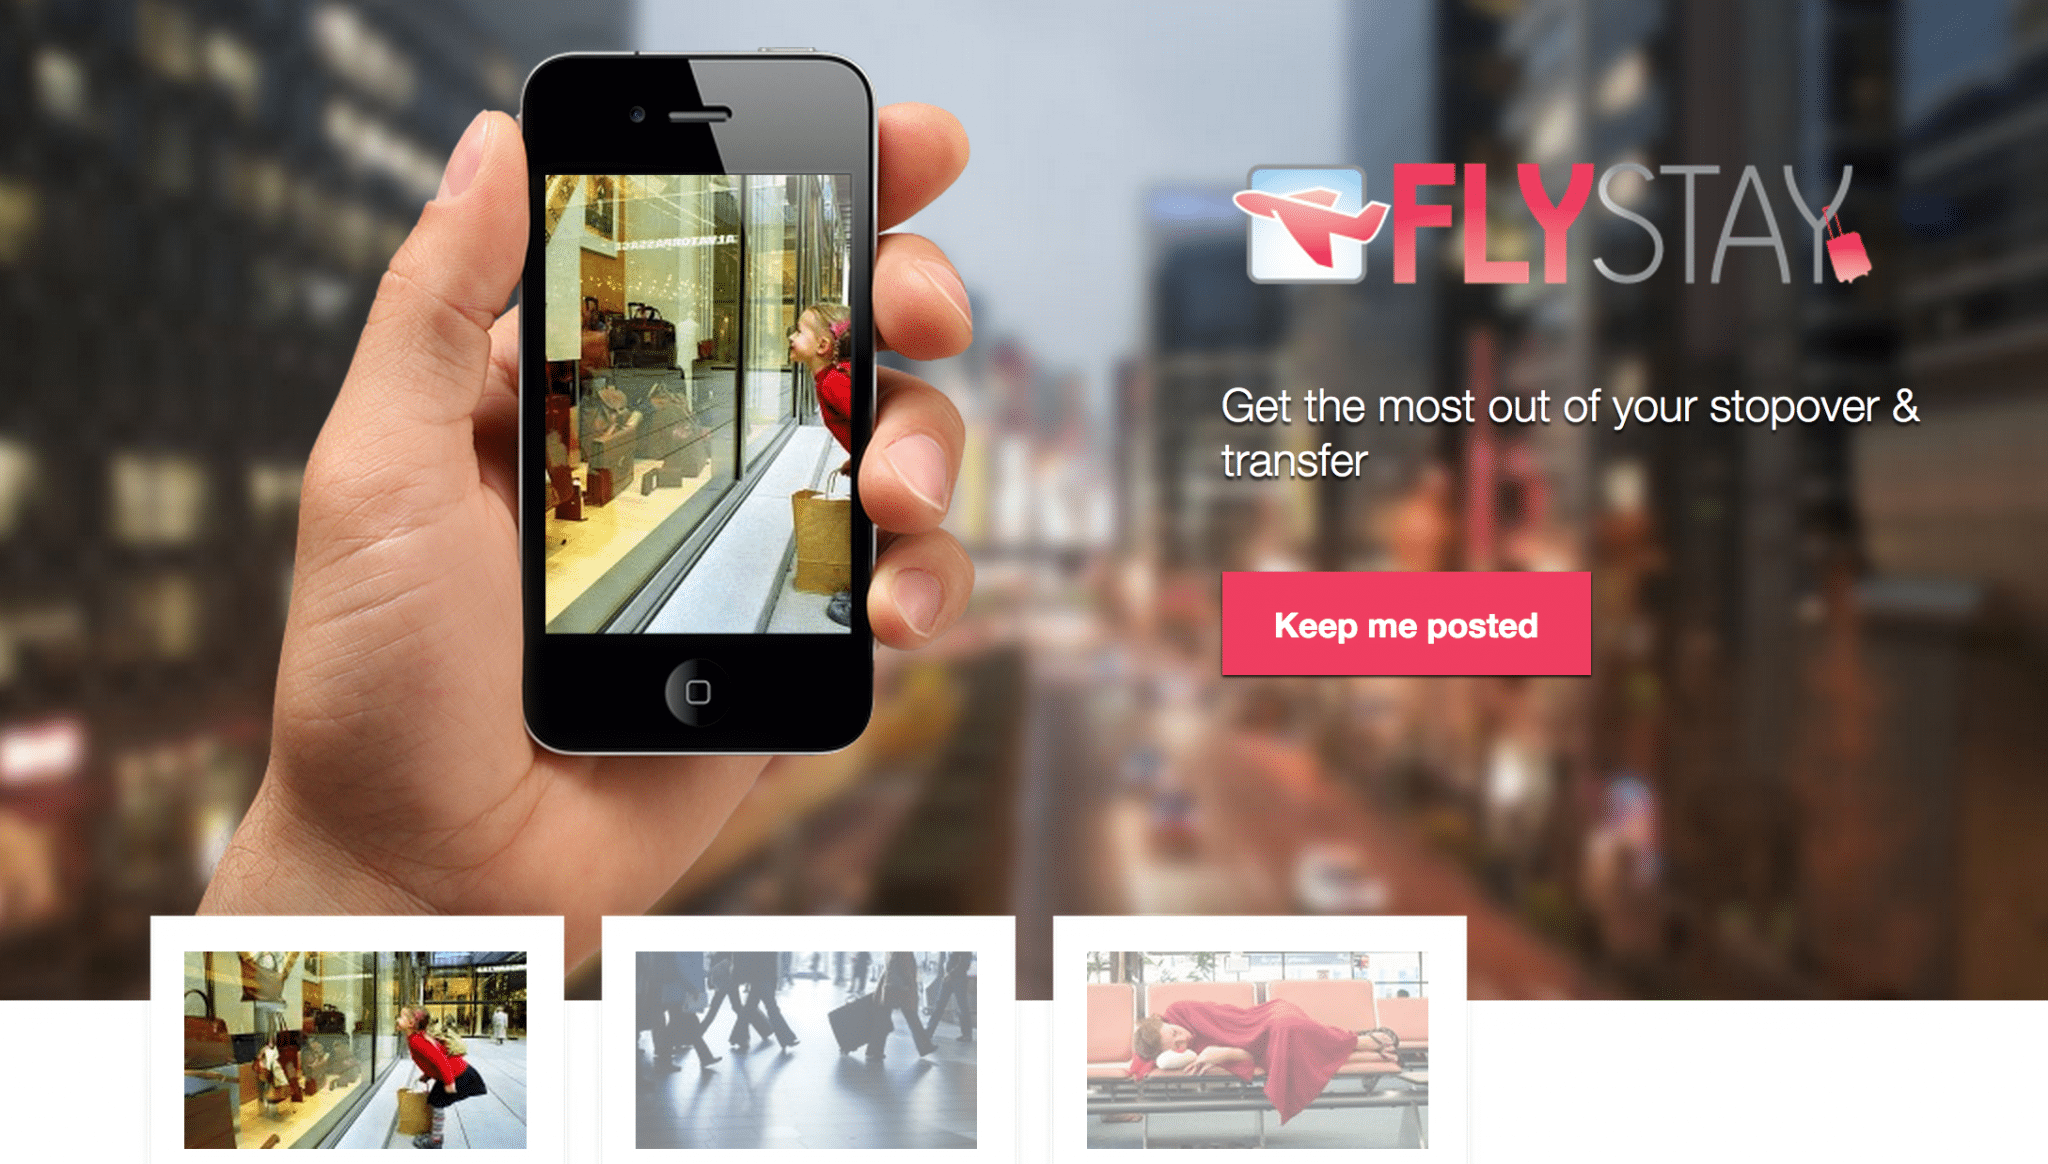 FlyStay helps air passengers plan for stopovers by offering special promotions and suggestions for airports.